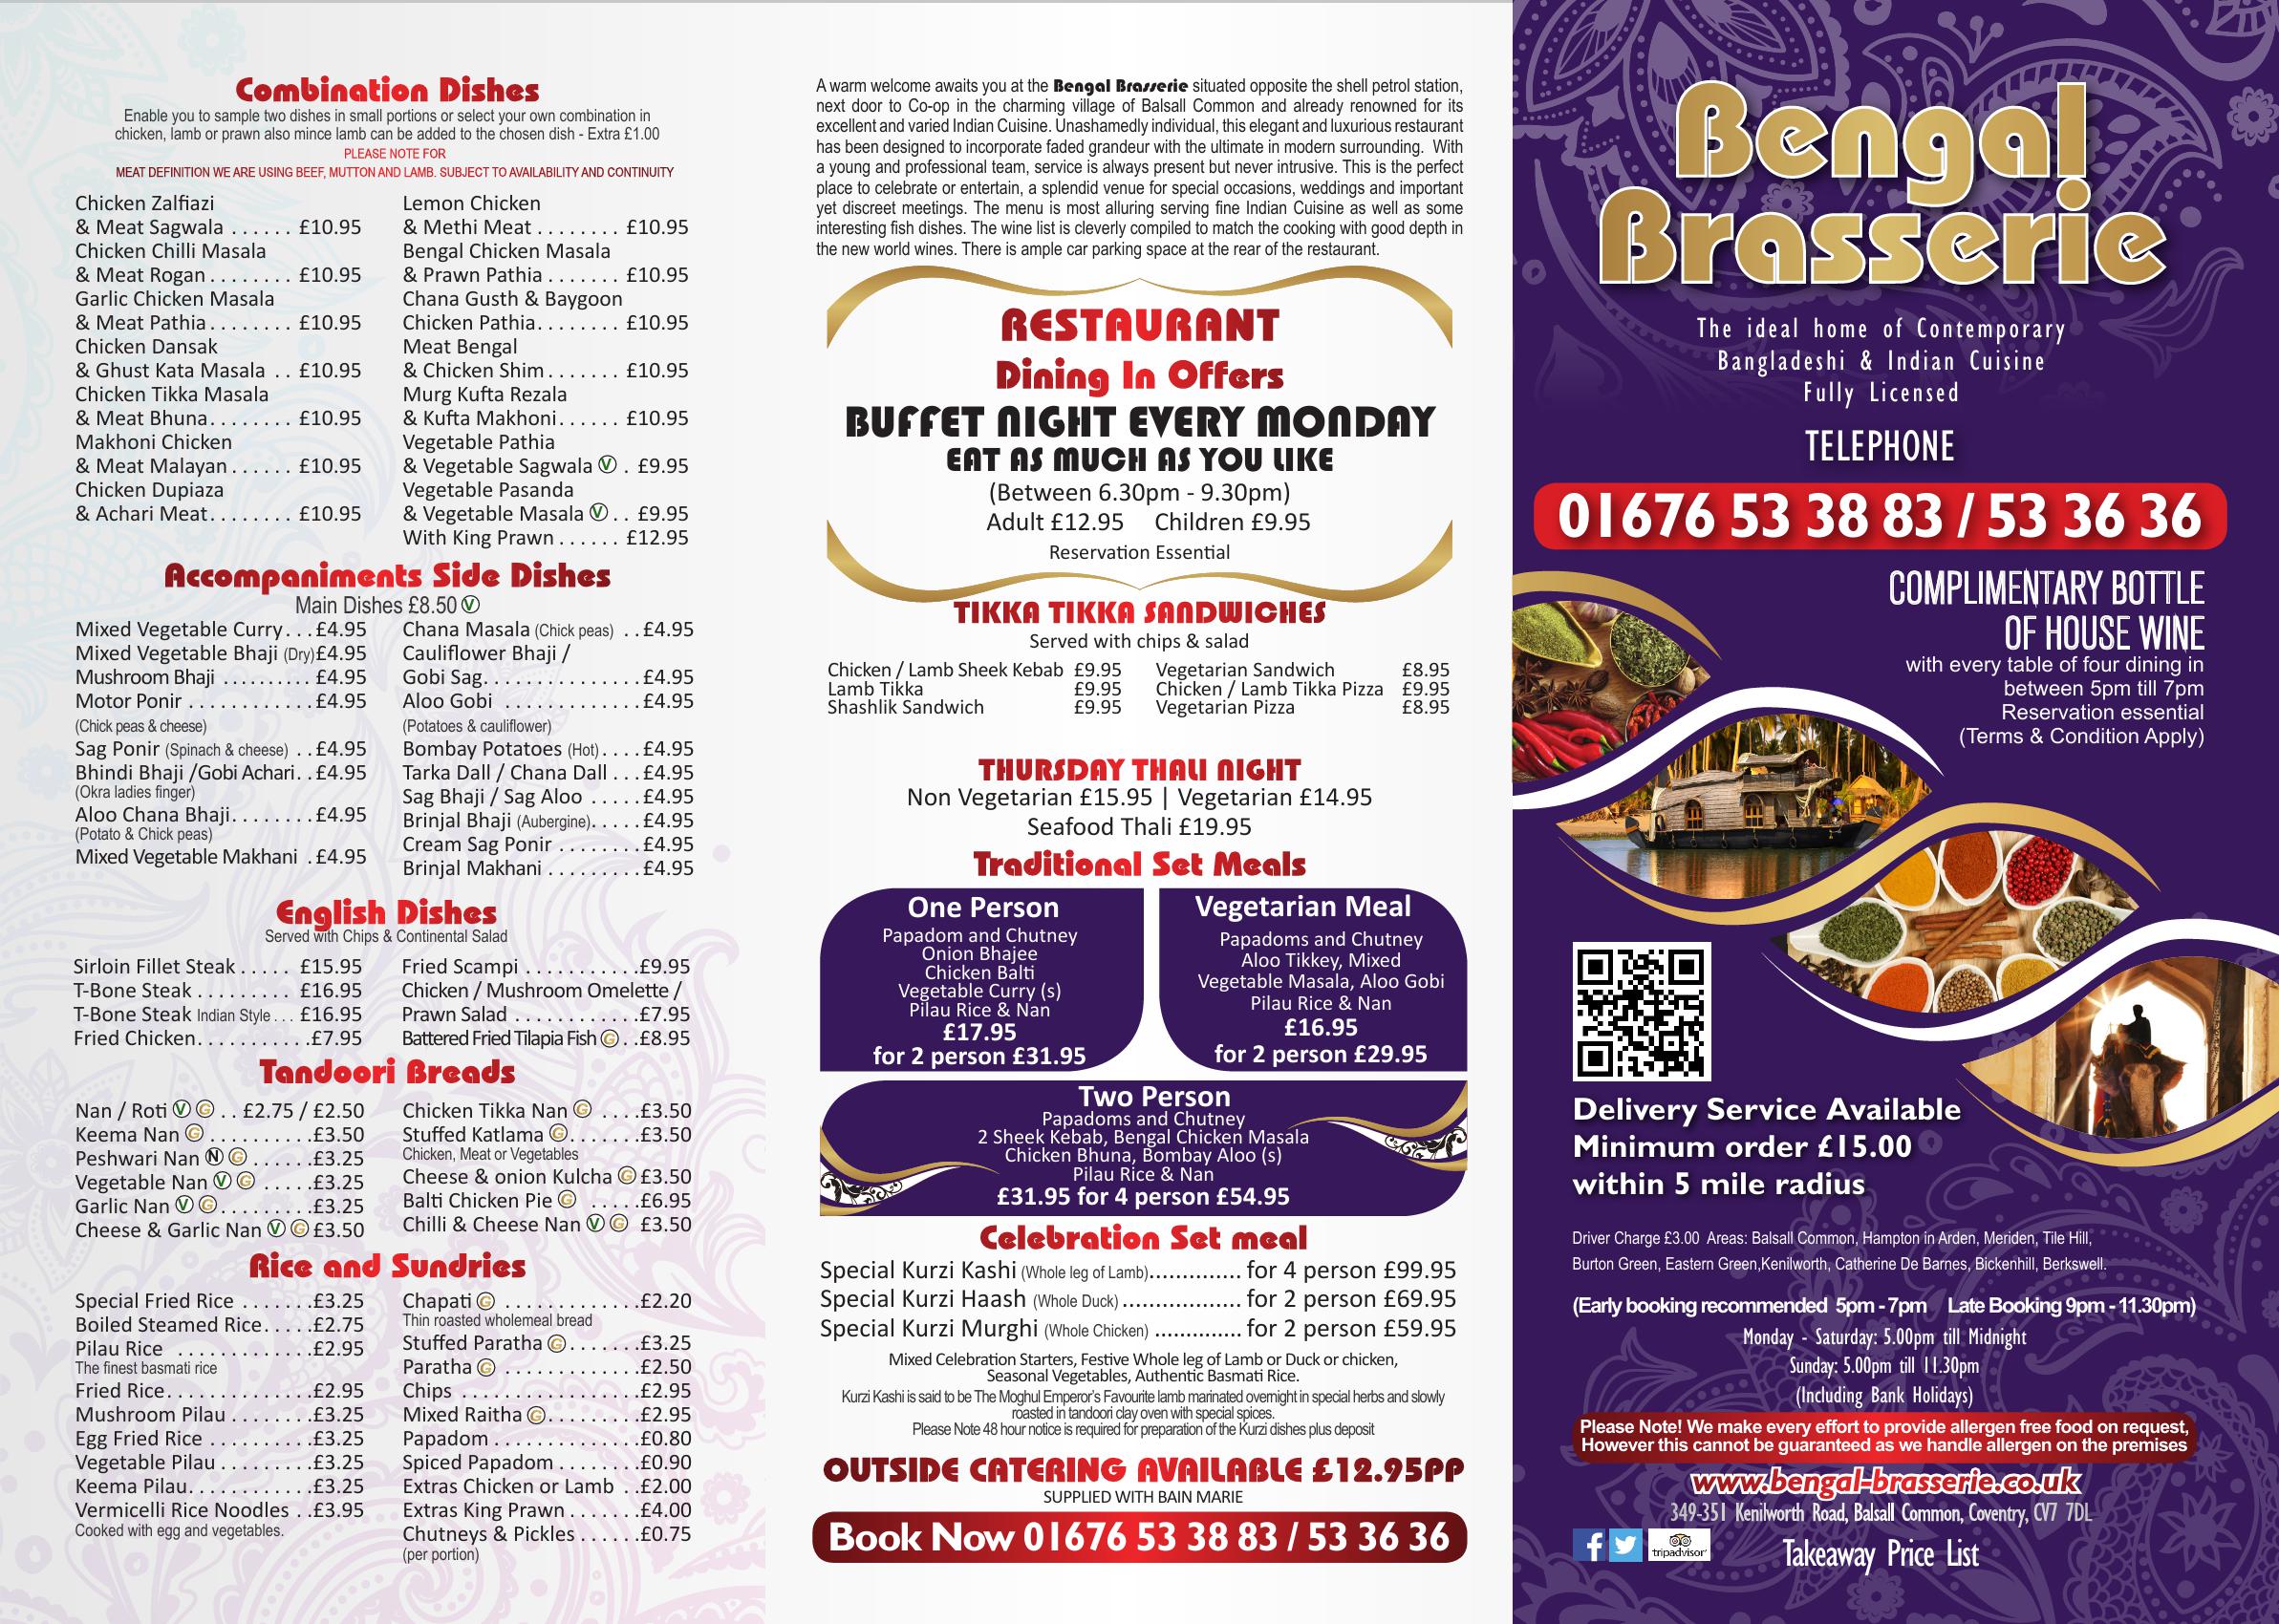 Bengal Brasserie Indian Cuisine Balsall Common Coventry - main menu